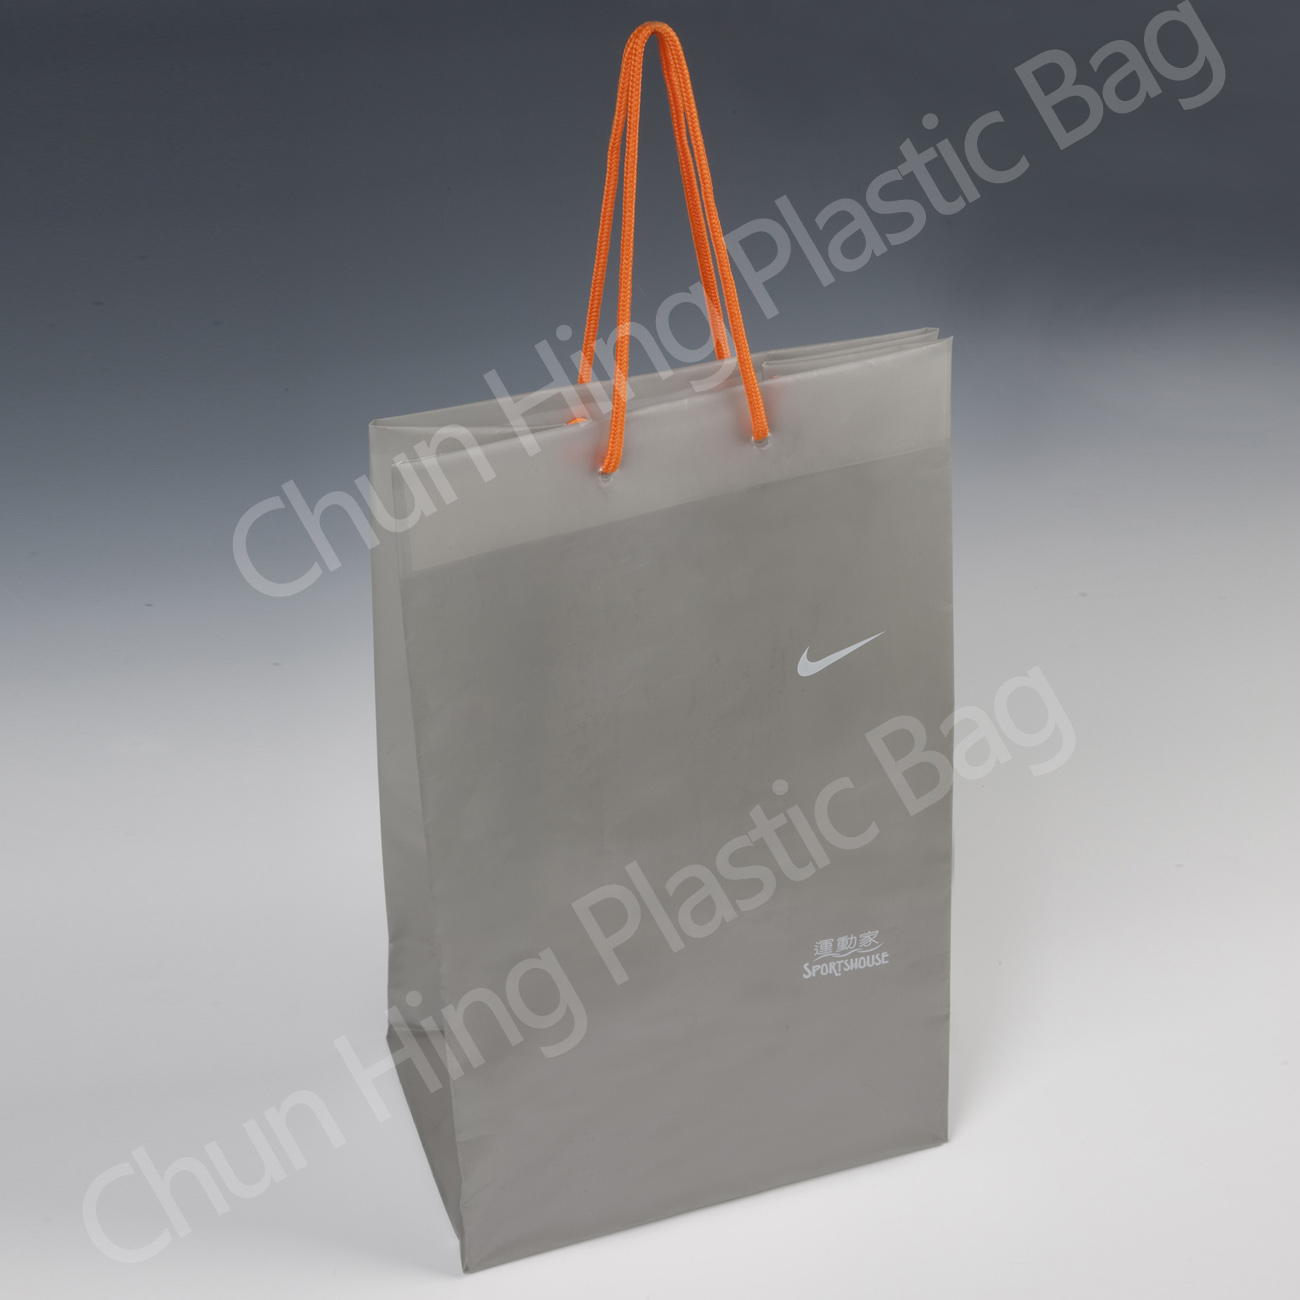 Carrier bags with rope handle